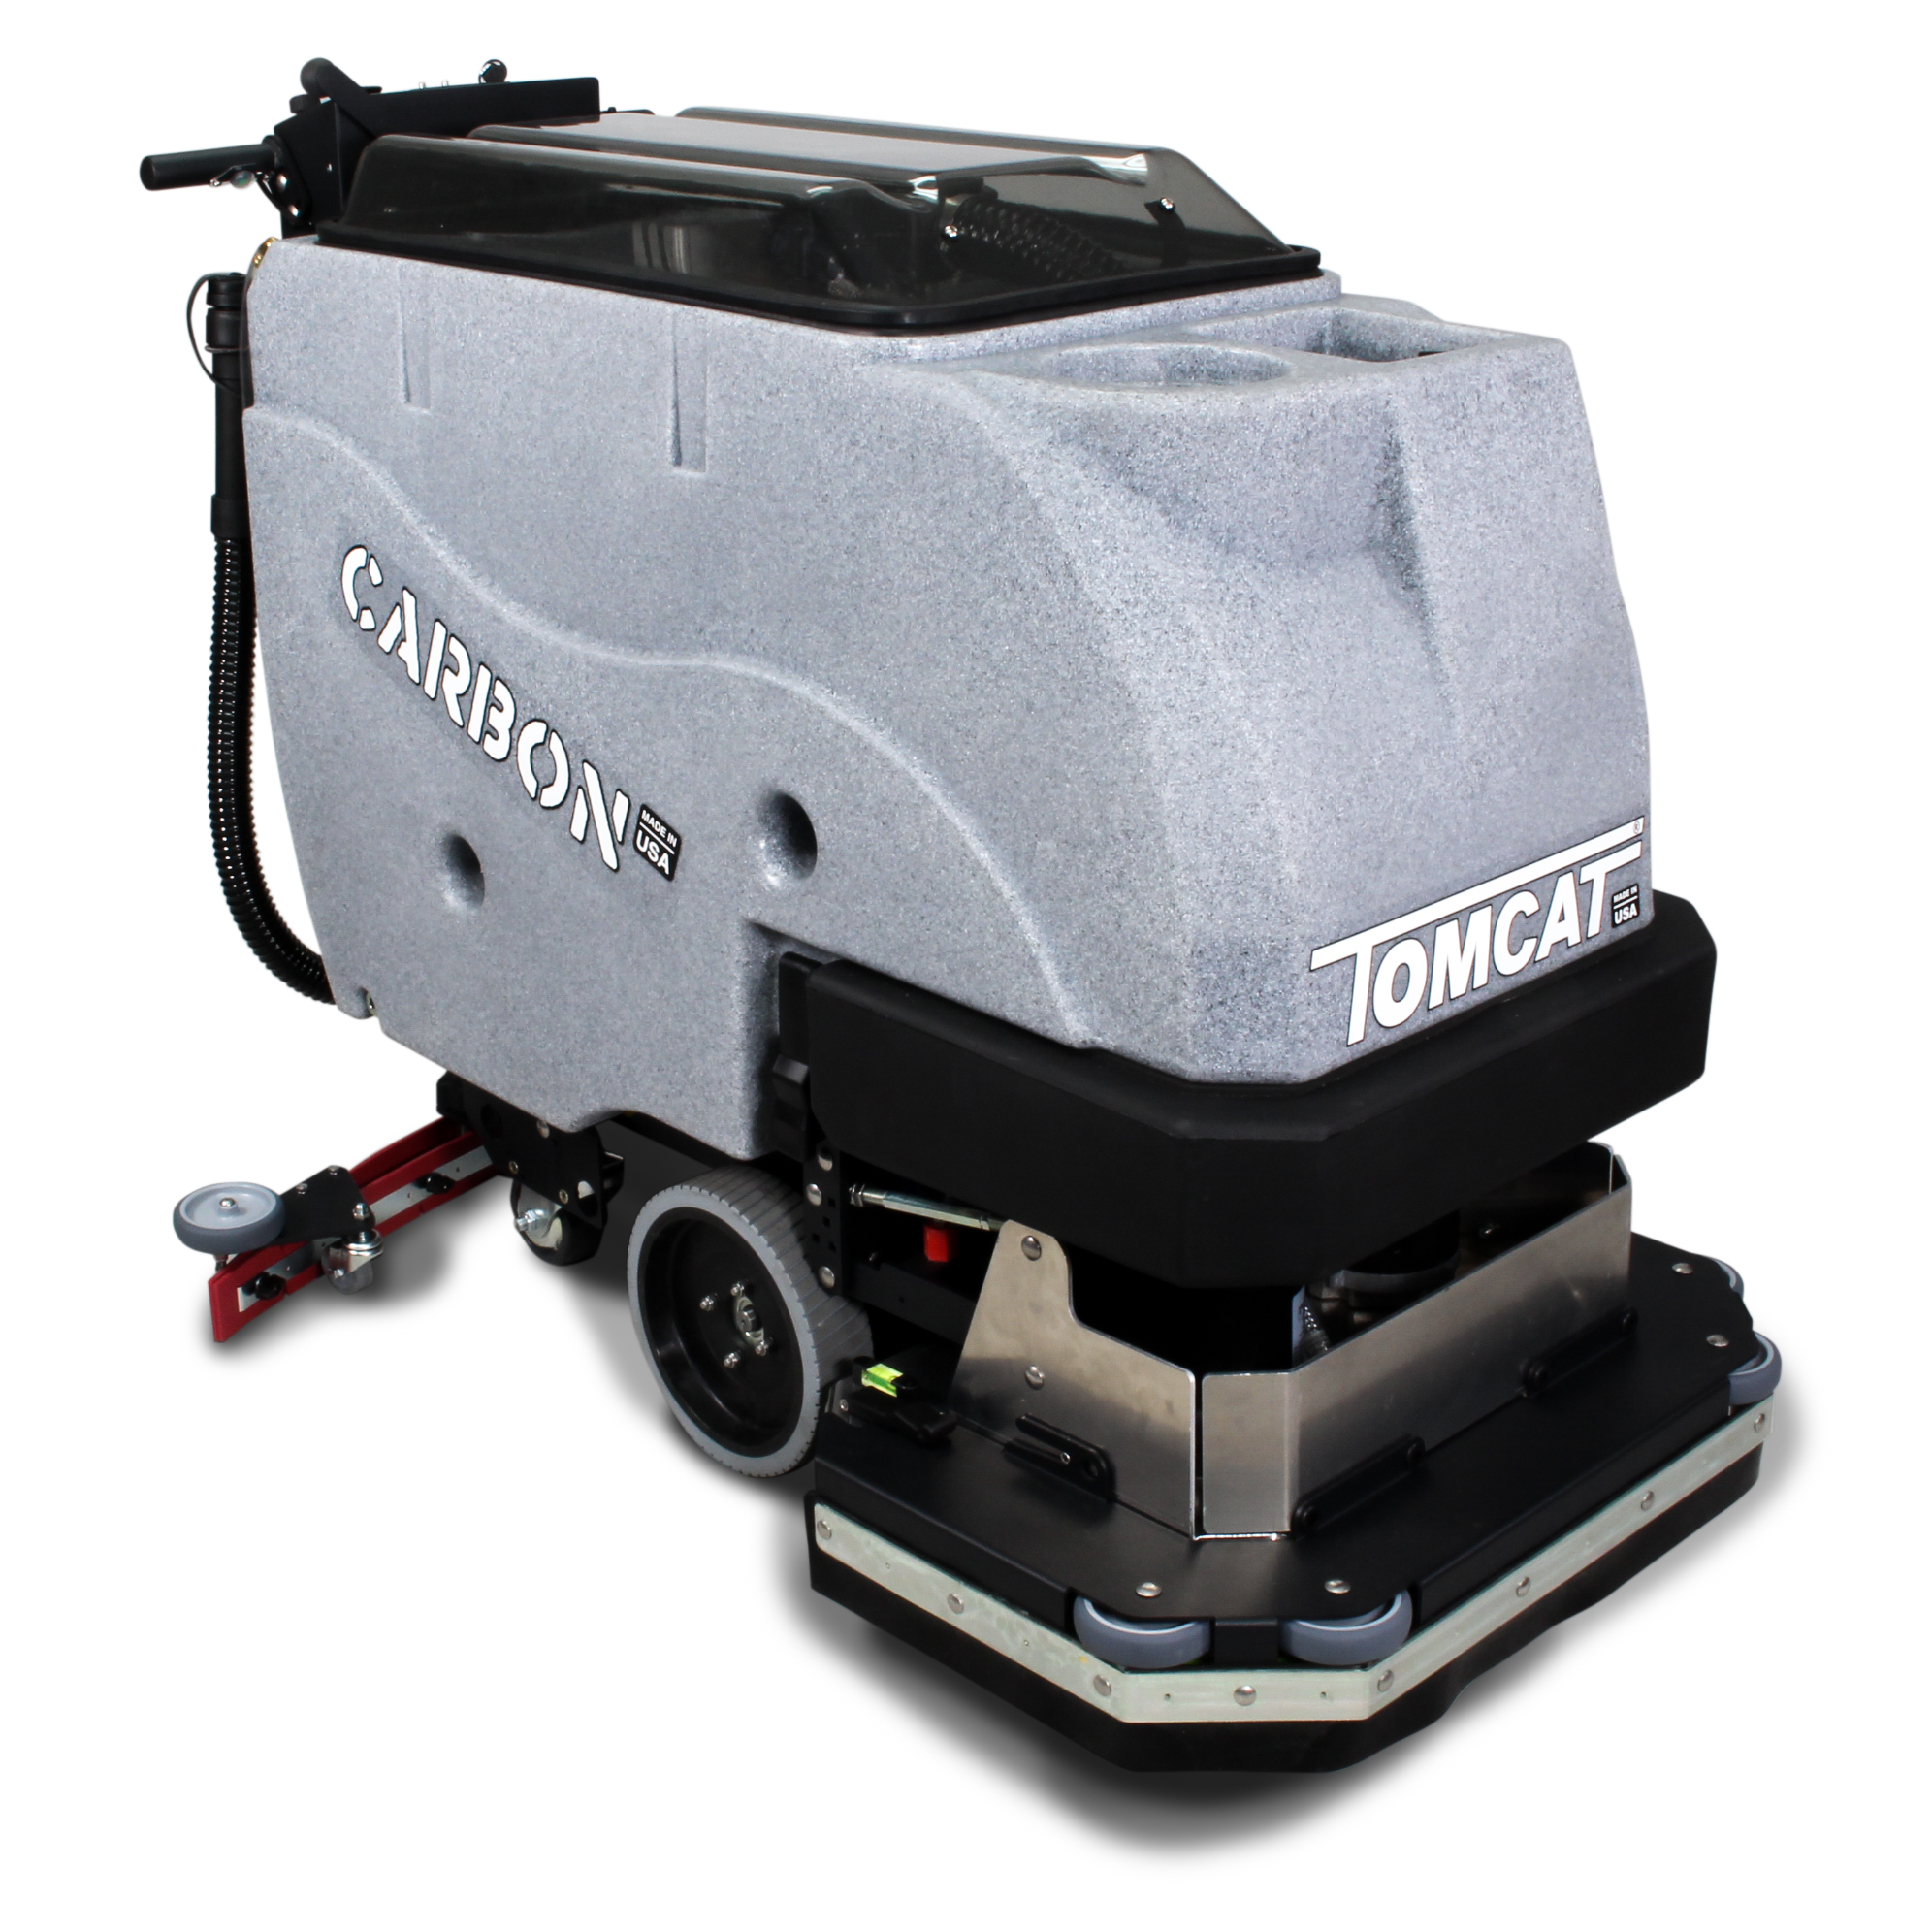 Tomcat Carbon 28&quot; Disk
Scrubber - Traction Drive